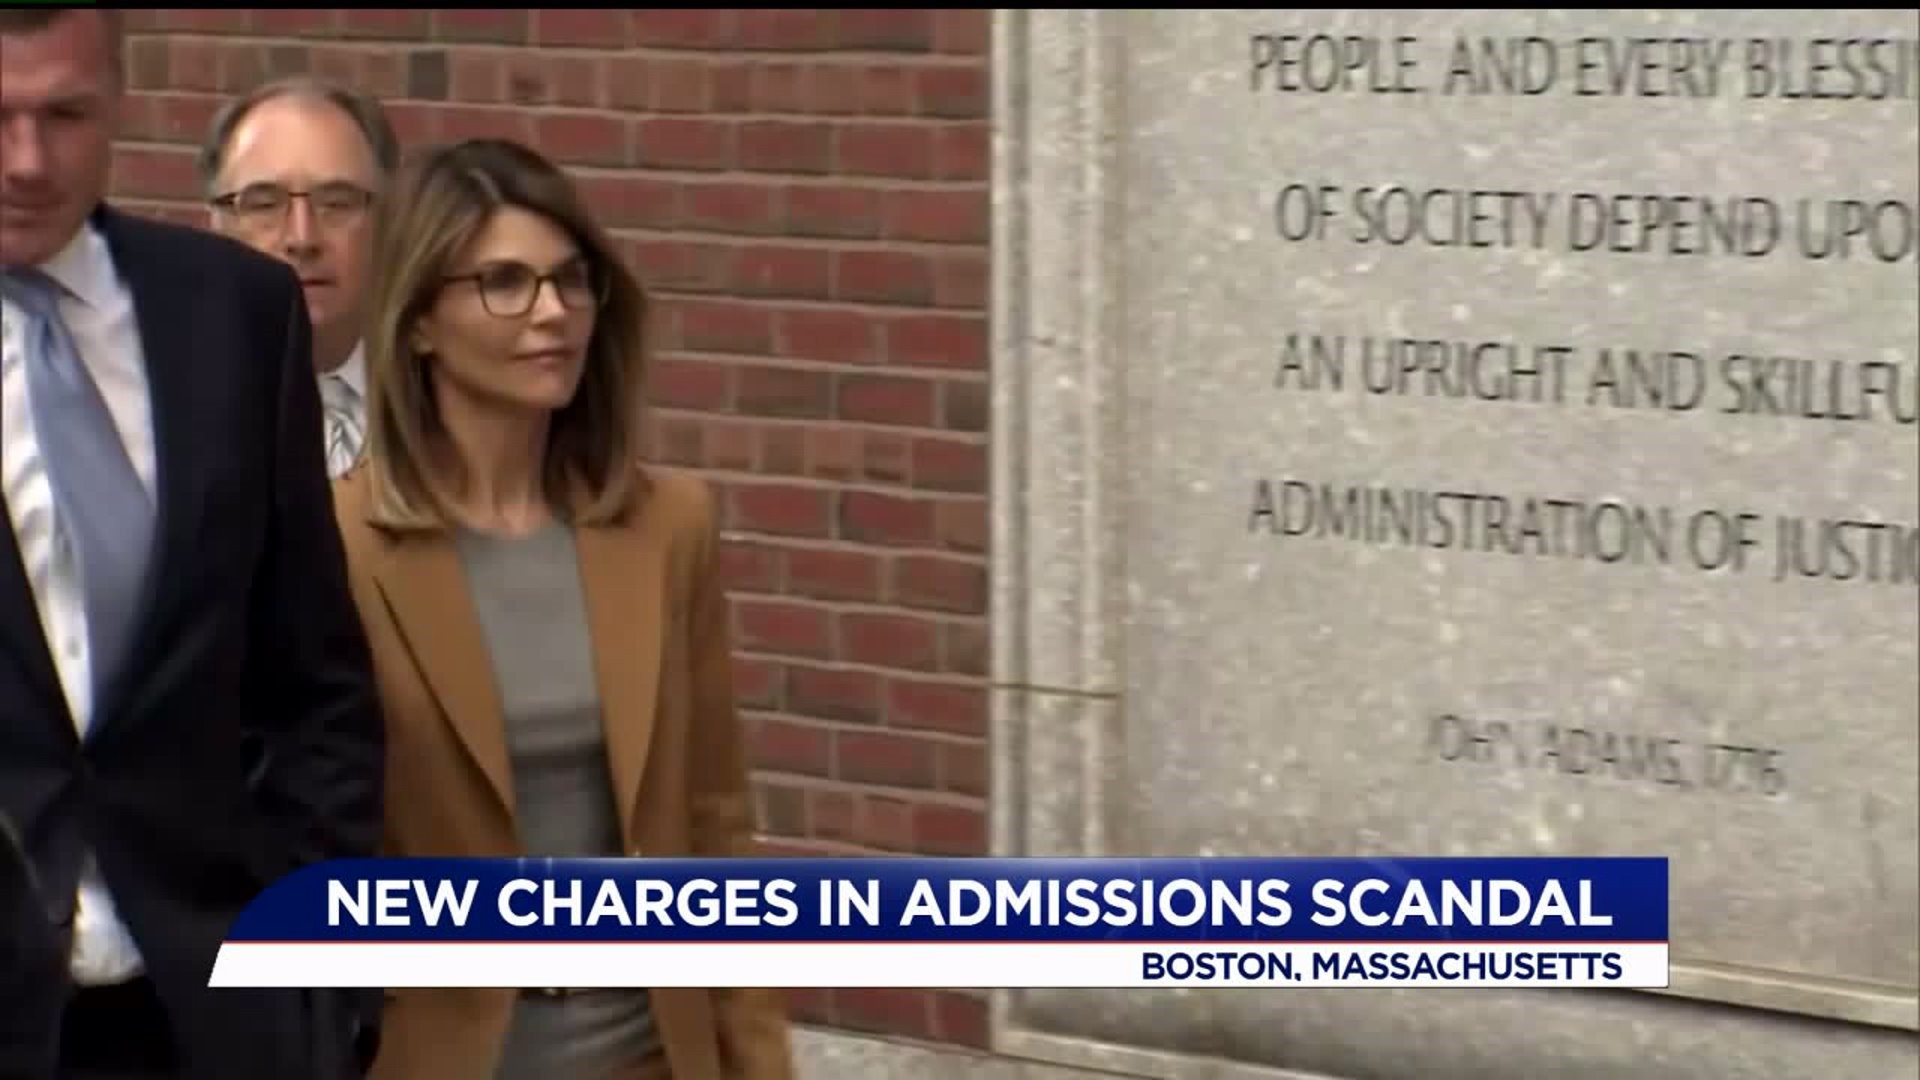 Lori Loughlin and other parents in college admissions scam indicted on new bribery charge